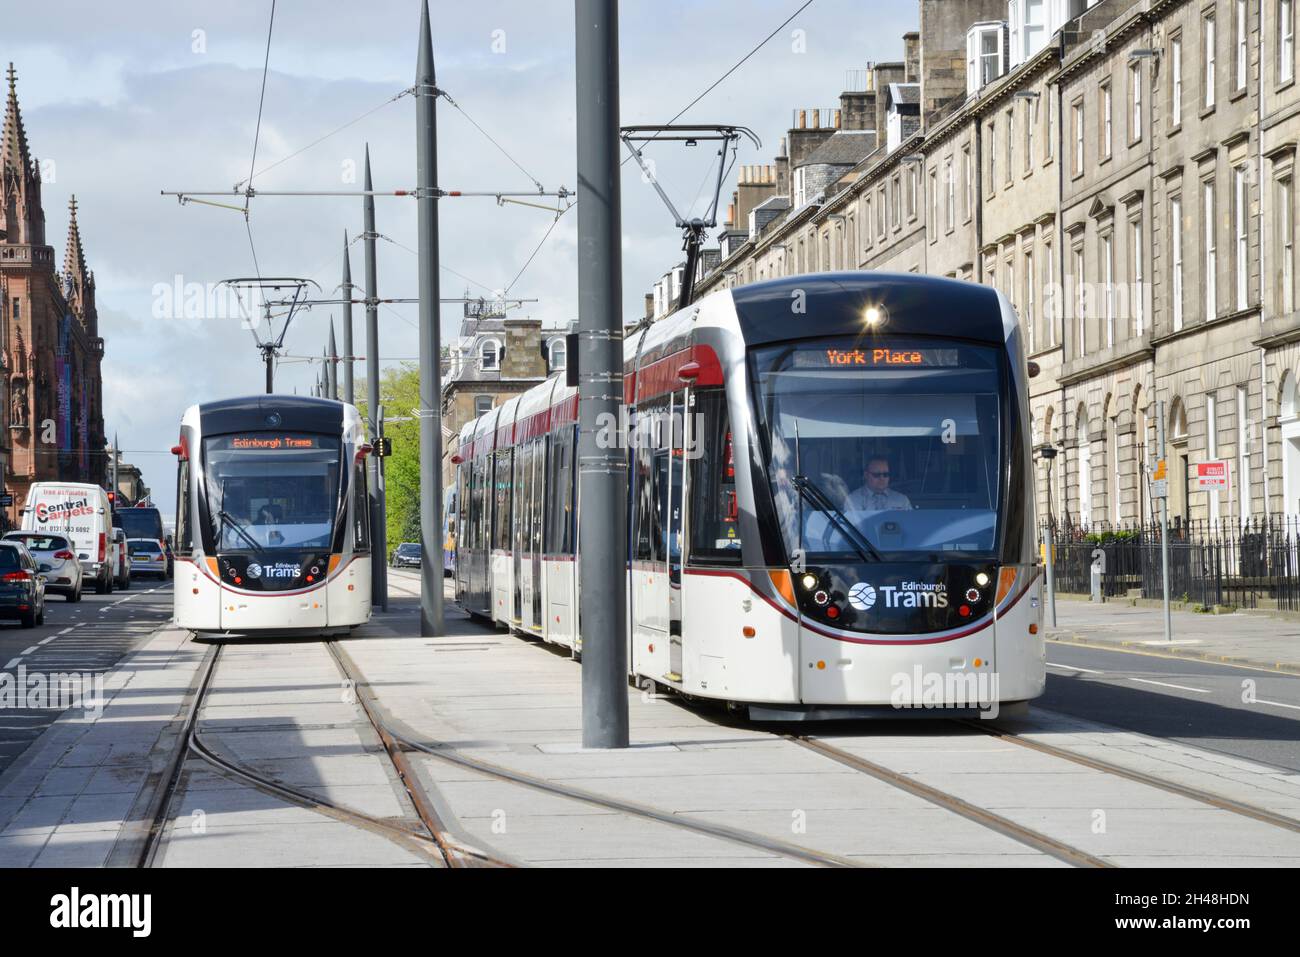 Edinburgh Trams on Test at York Place before opening Stock Photo